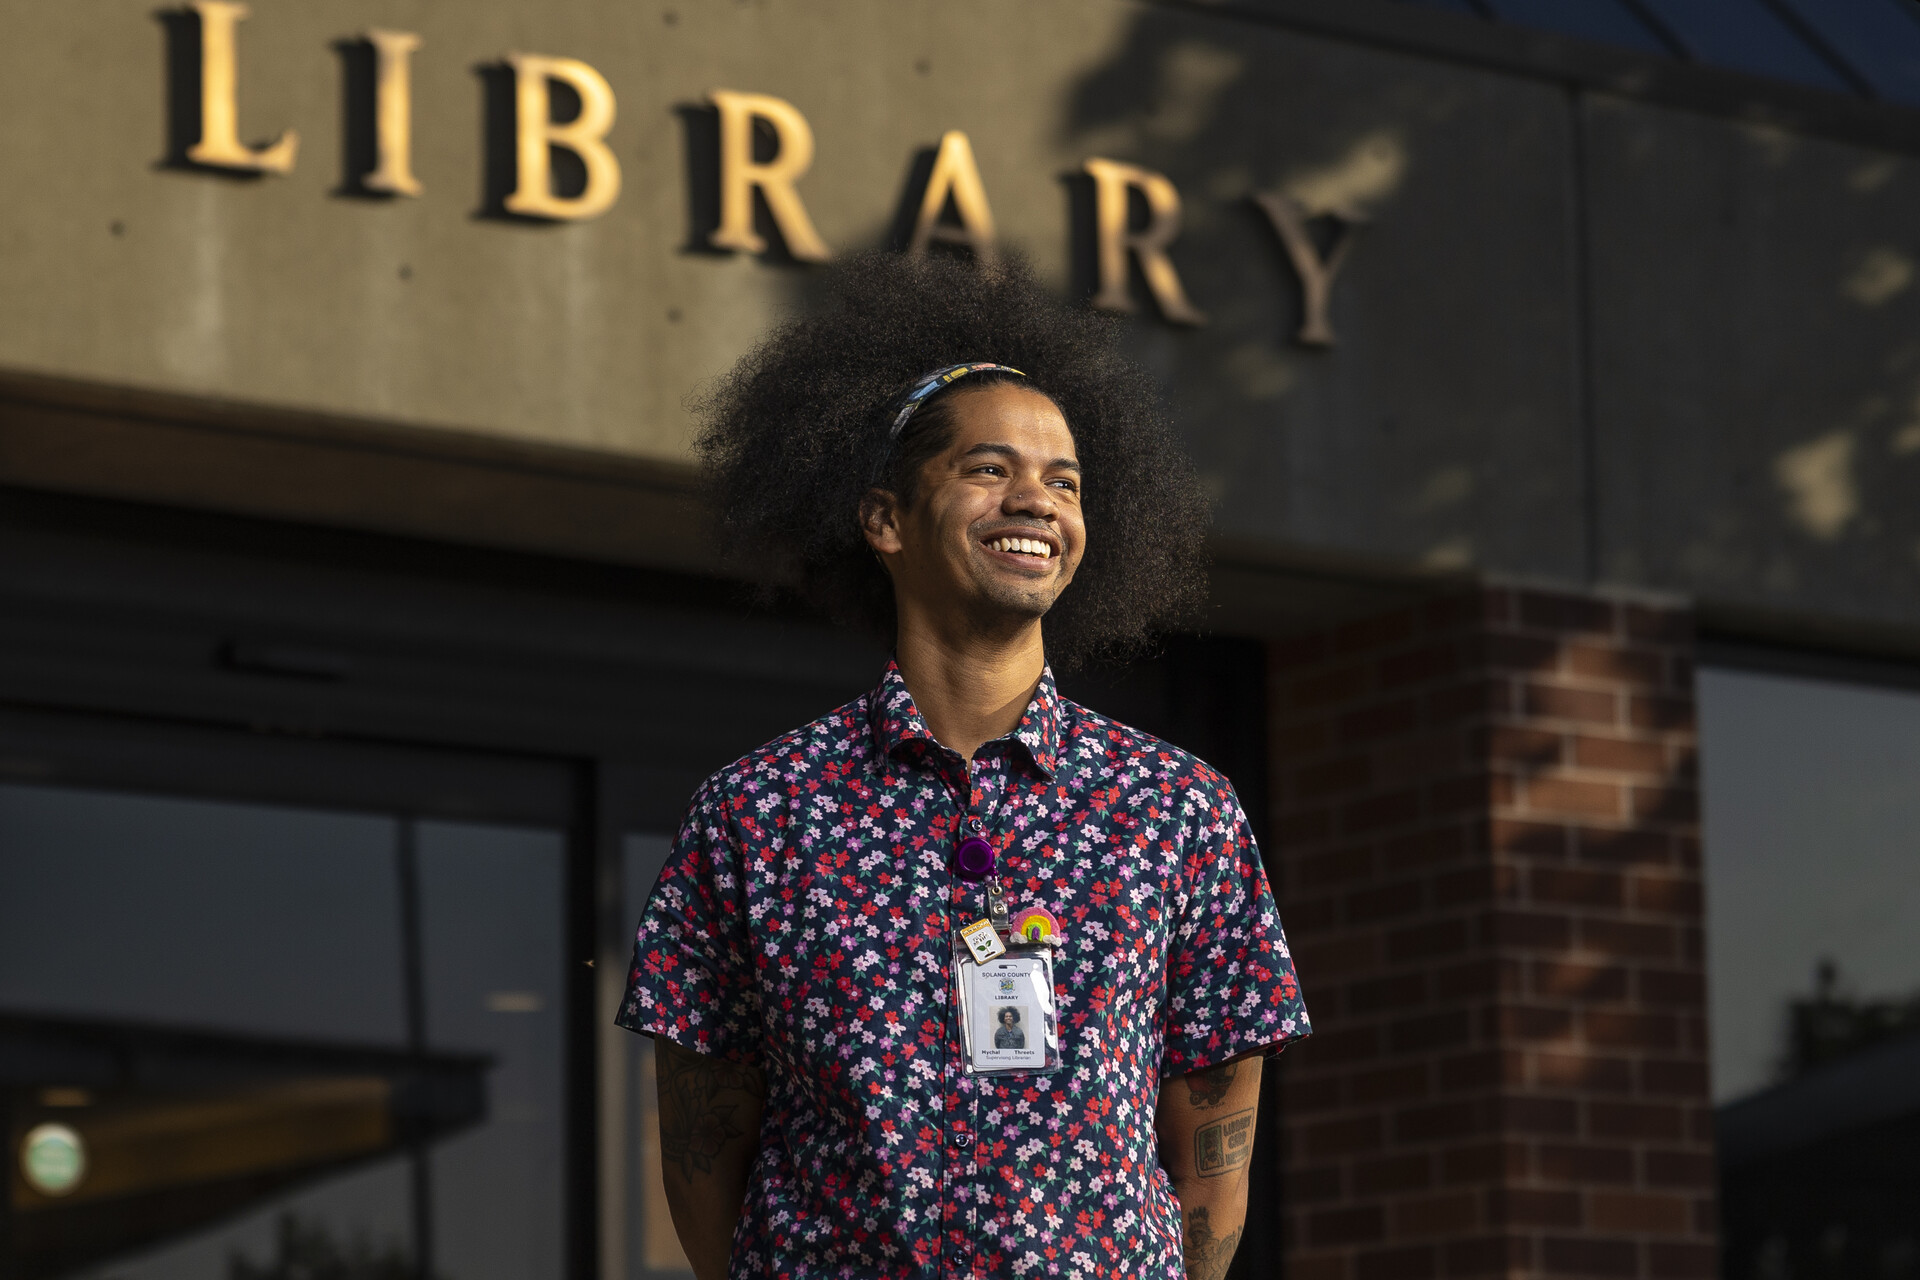 A person with their hair in an afro stands in front of a building with the word "Library" written over the entrance.